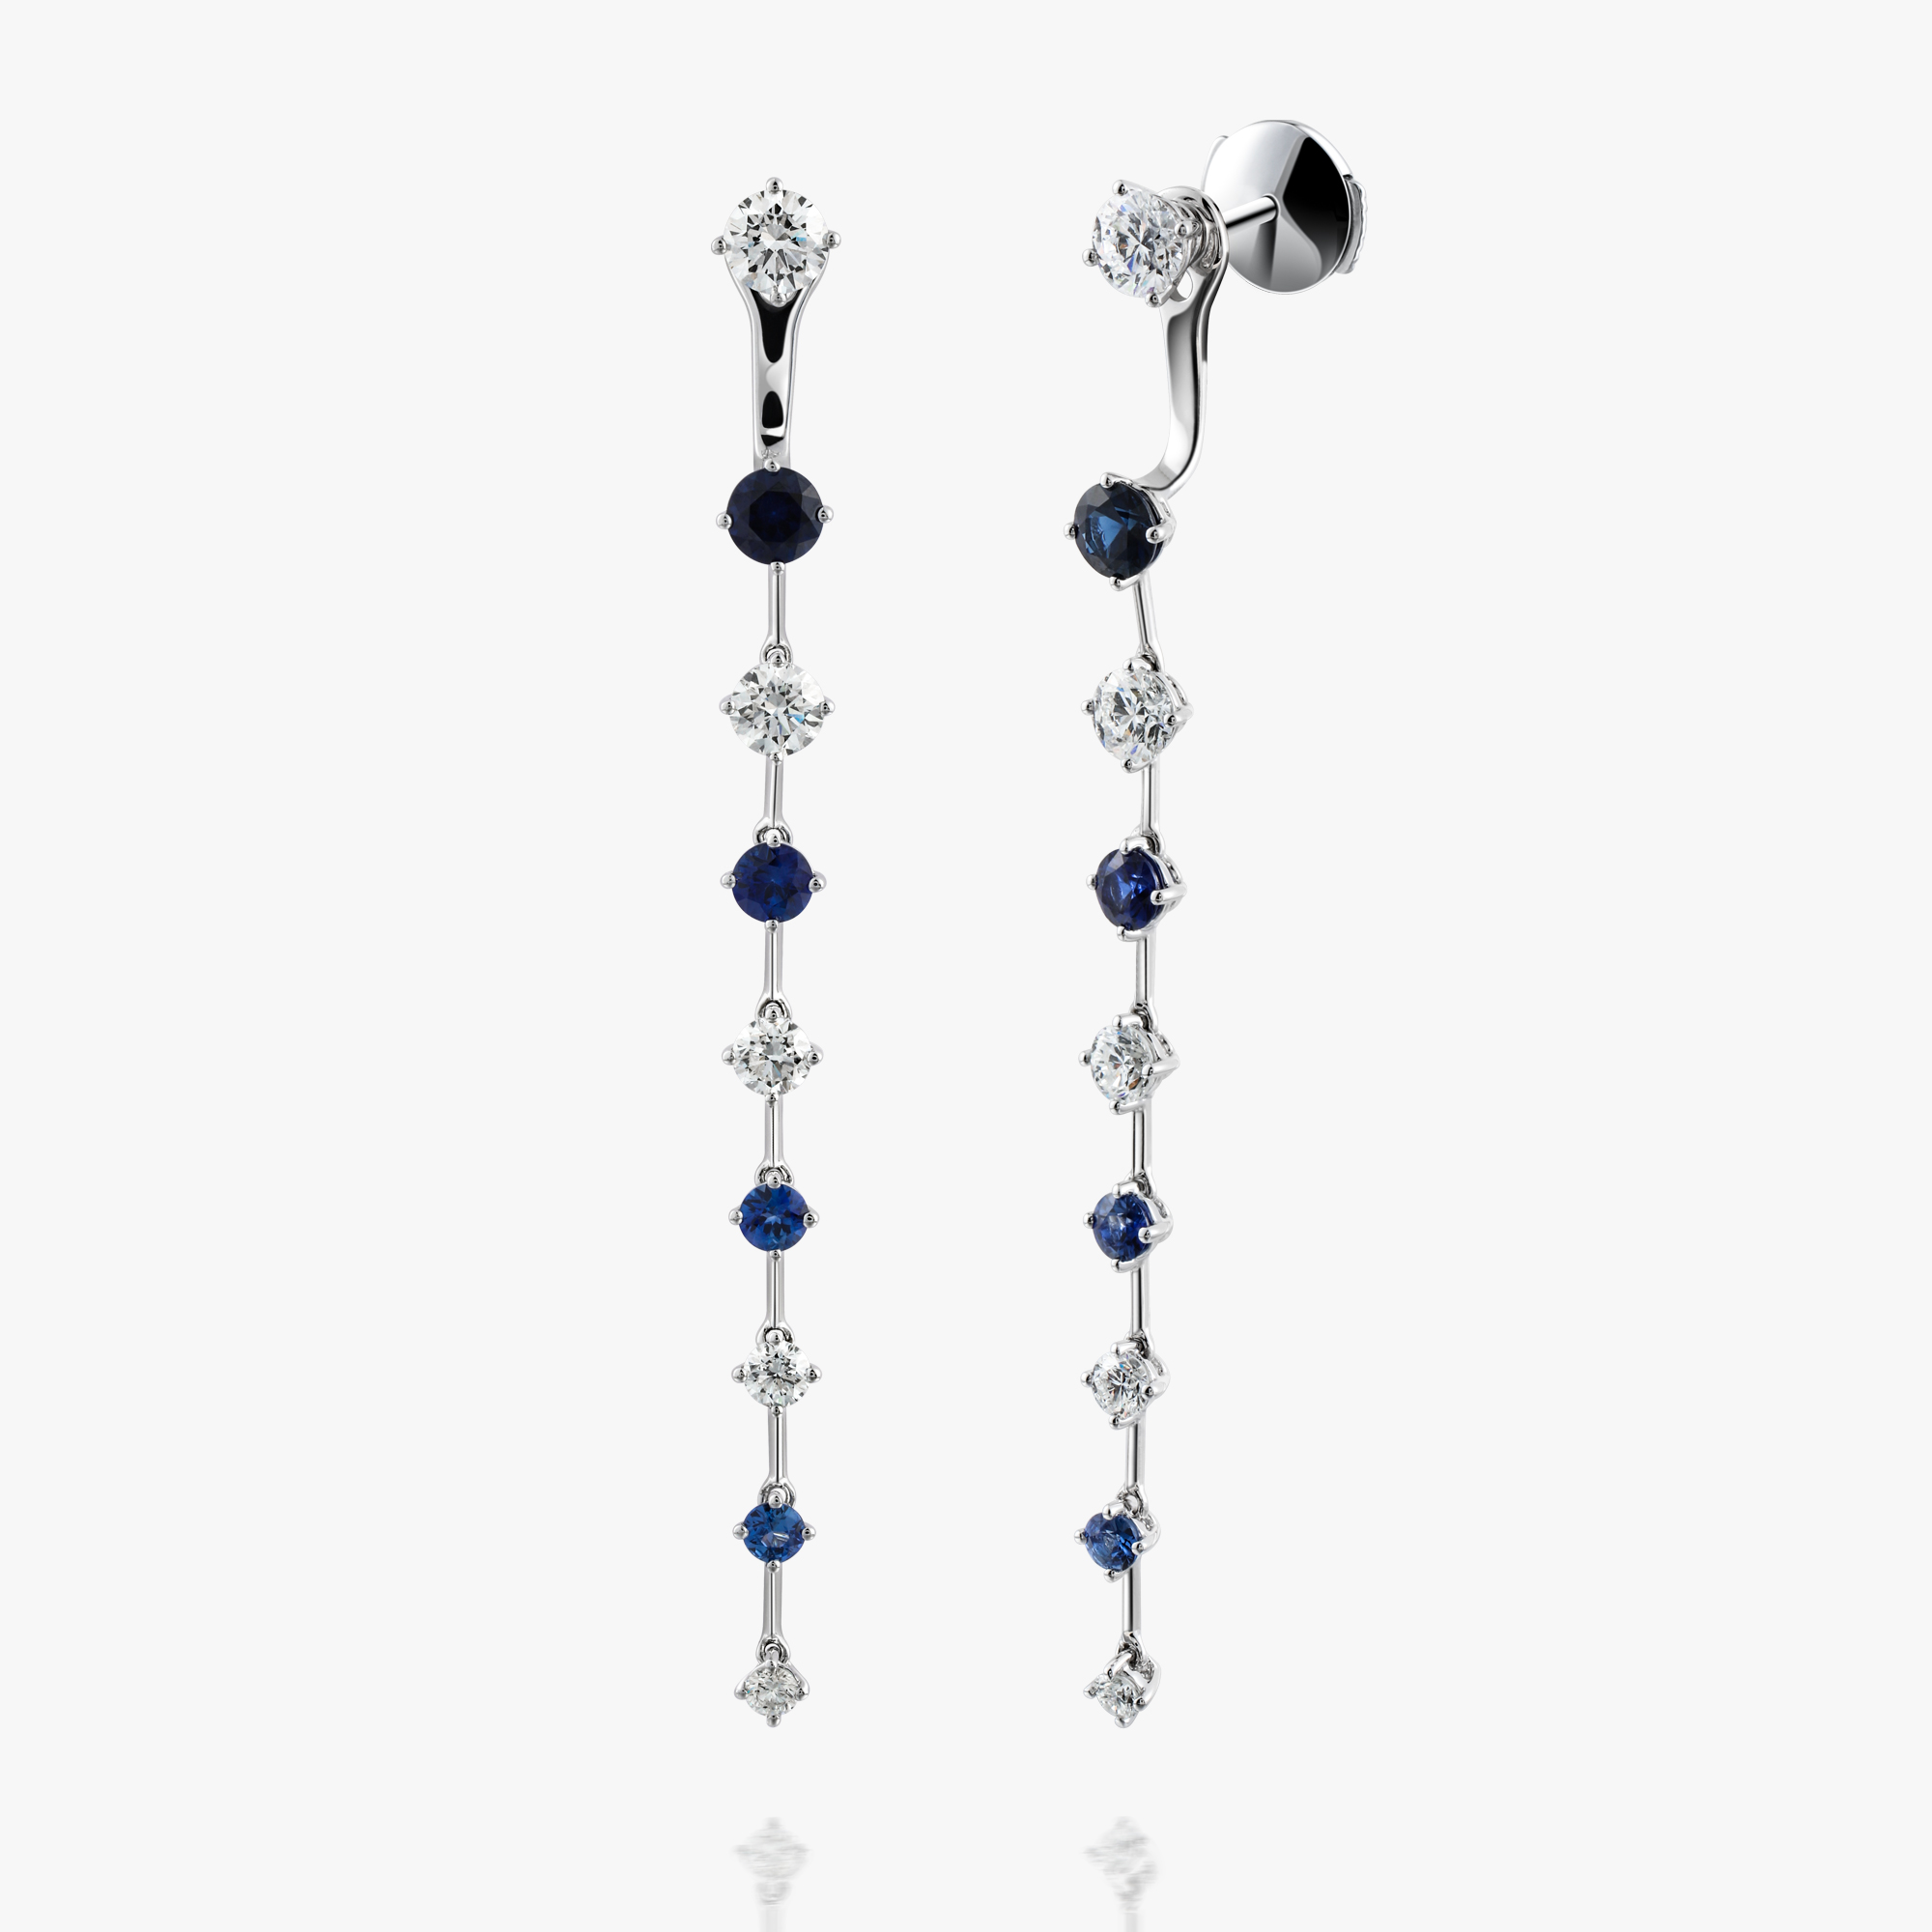 ACCA 18K Earrings With Diamond and Sapphires